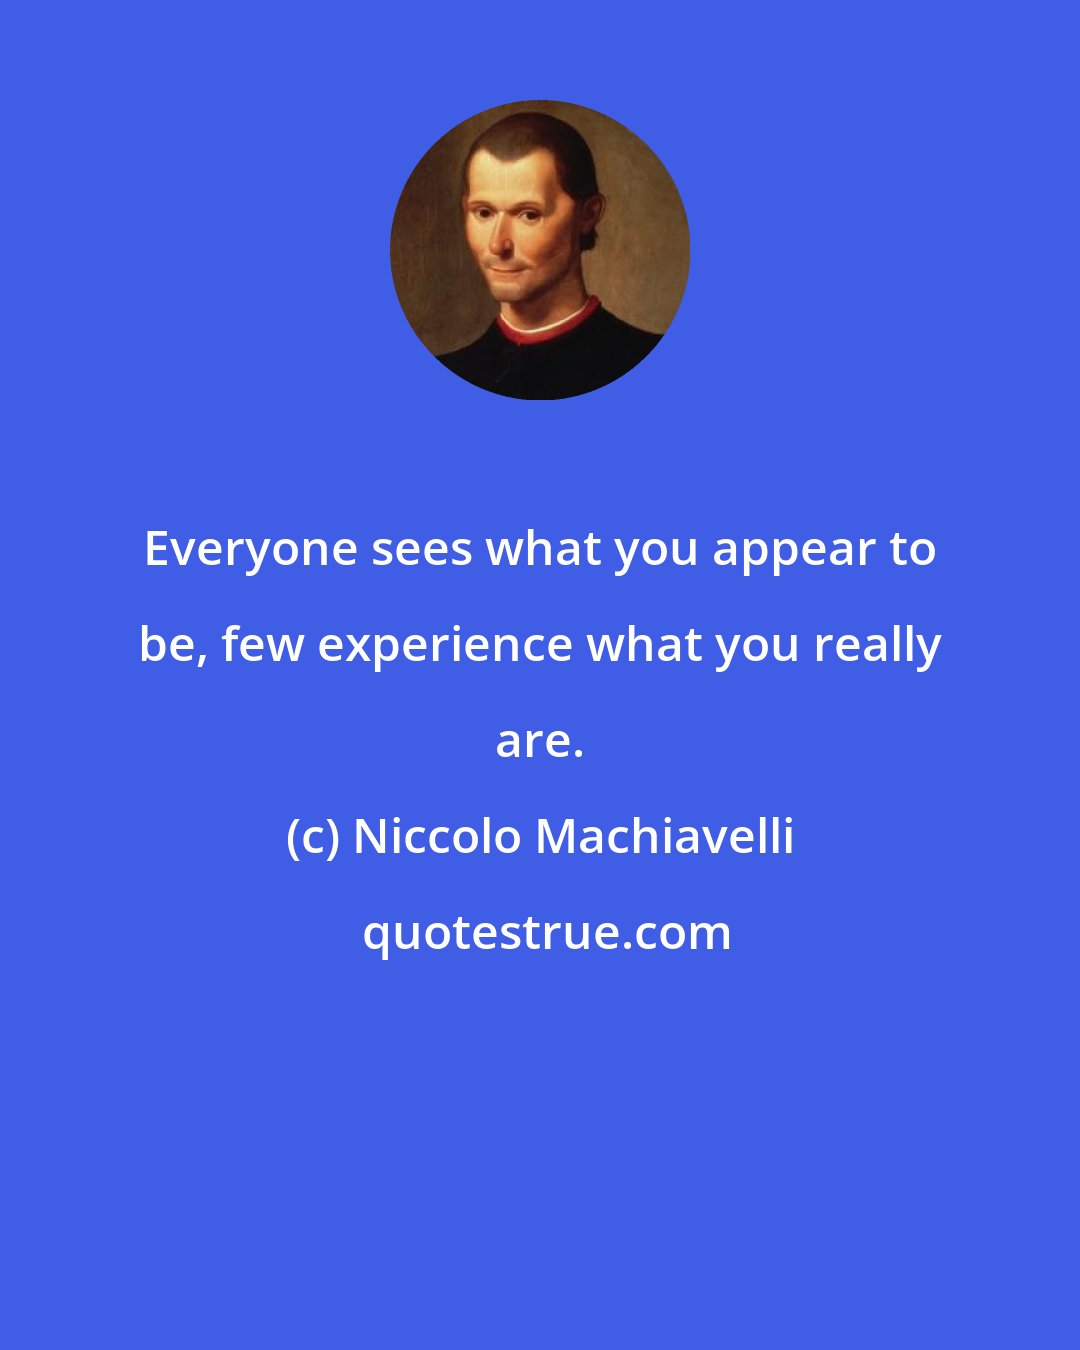 Niccolo Machiavelli: Everyone sees what you appear to be, few experience what you really are.